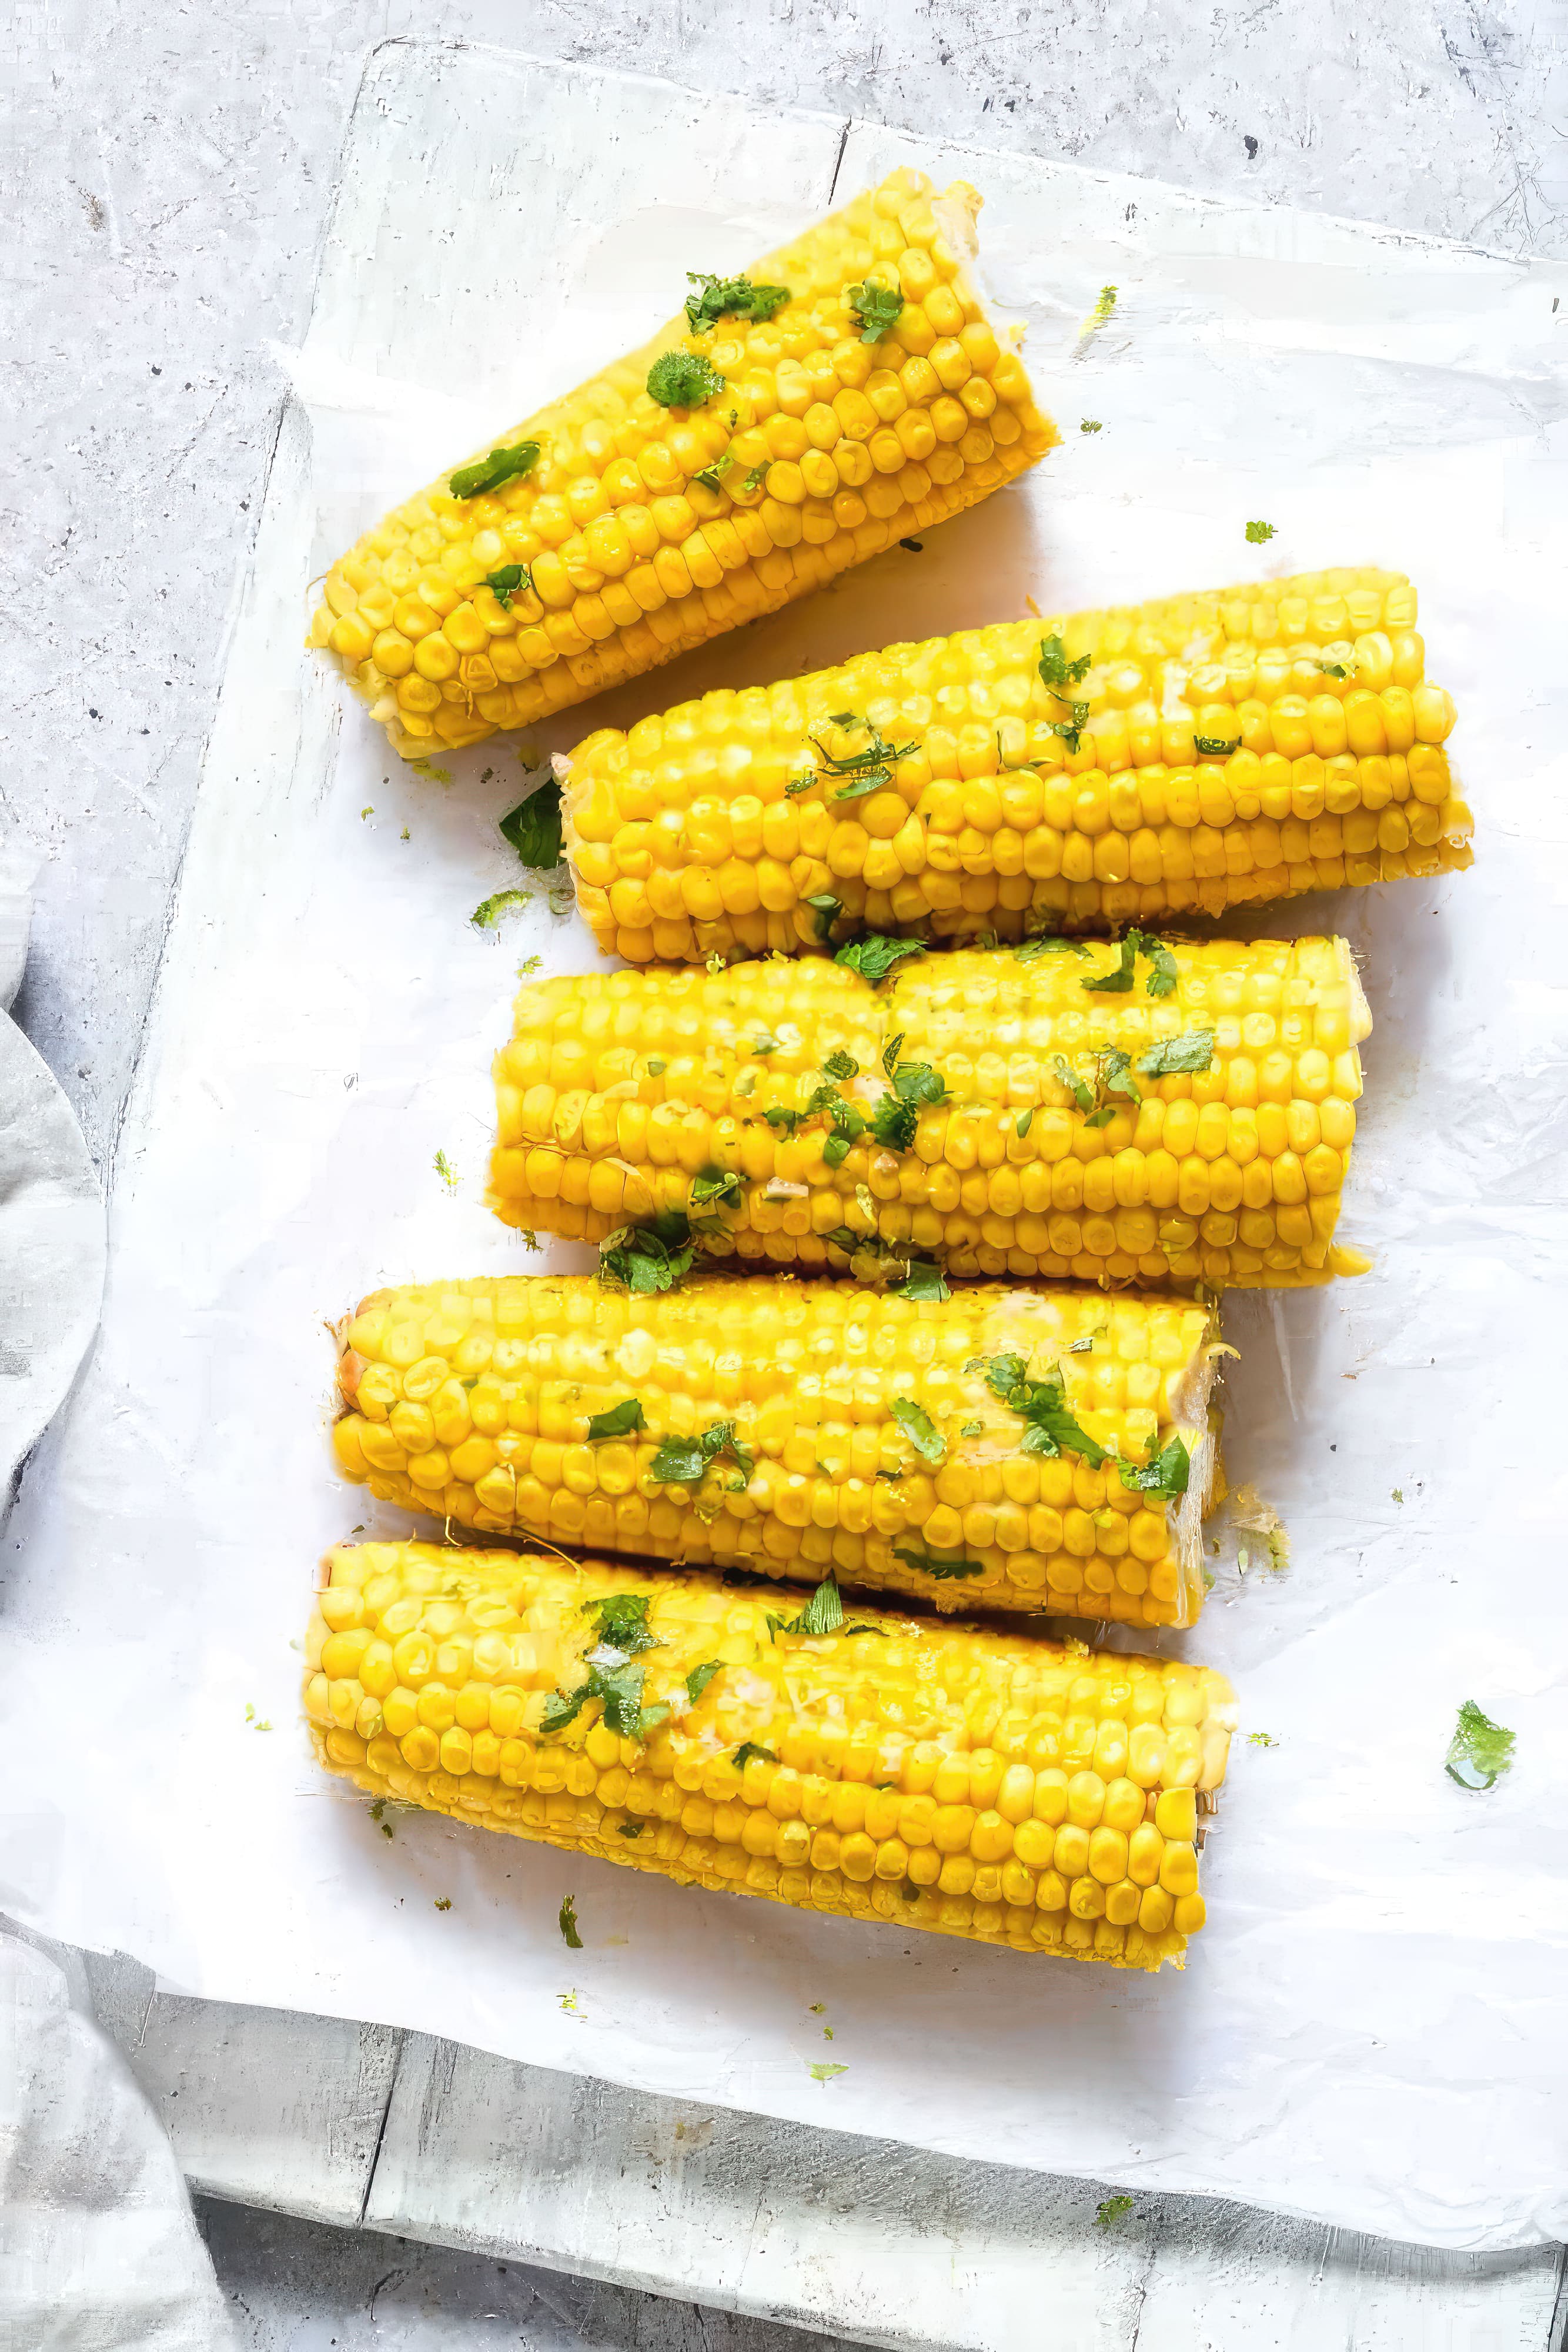 Freshly cooked corn on the cob garnished with aromatic herbs, presented on a pristine white background